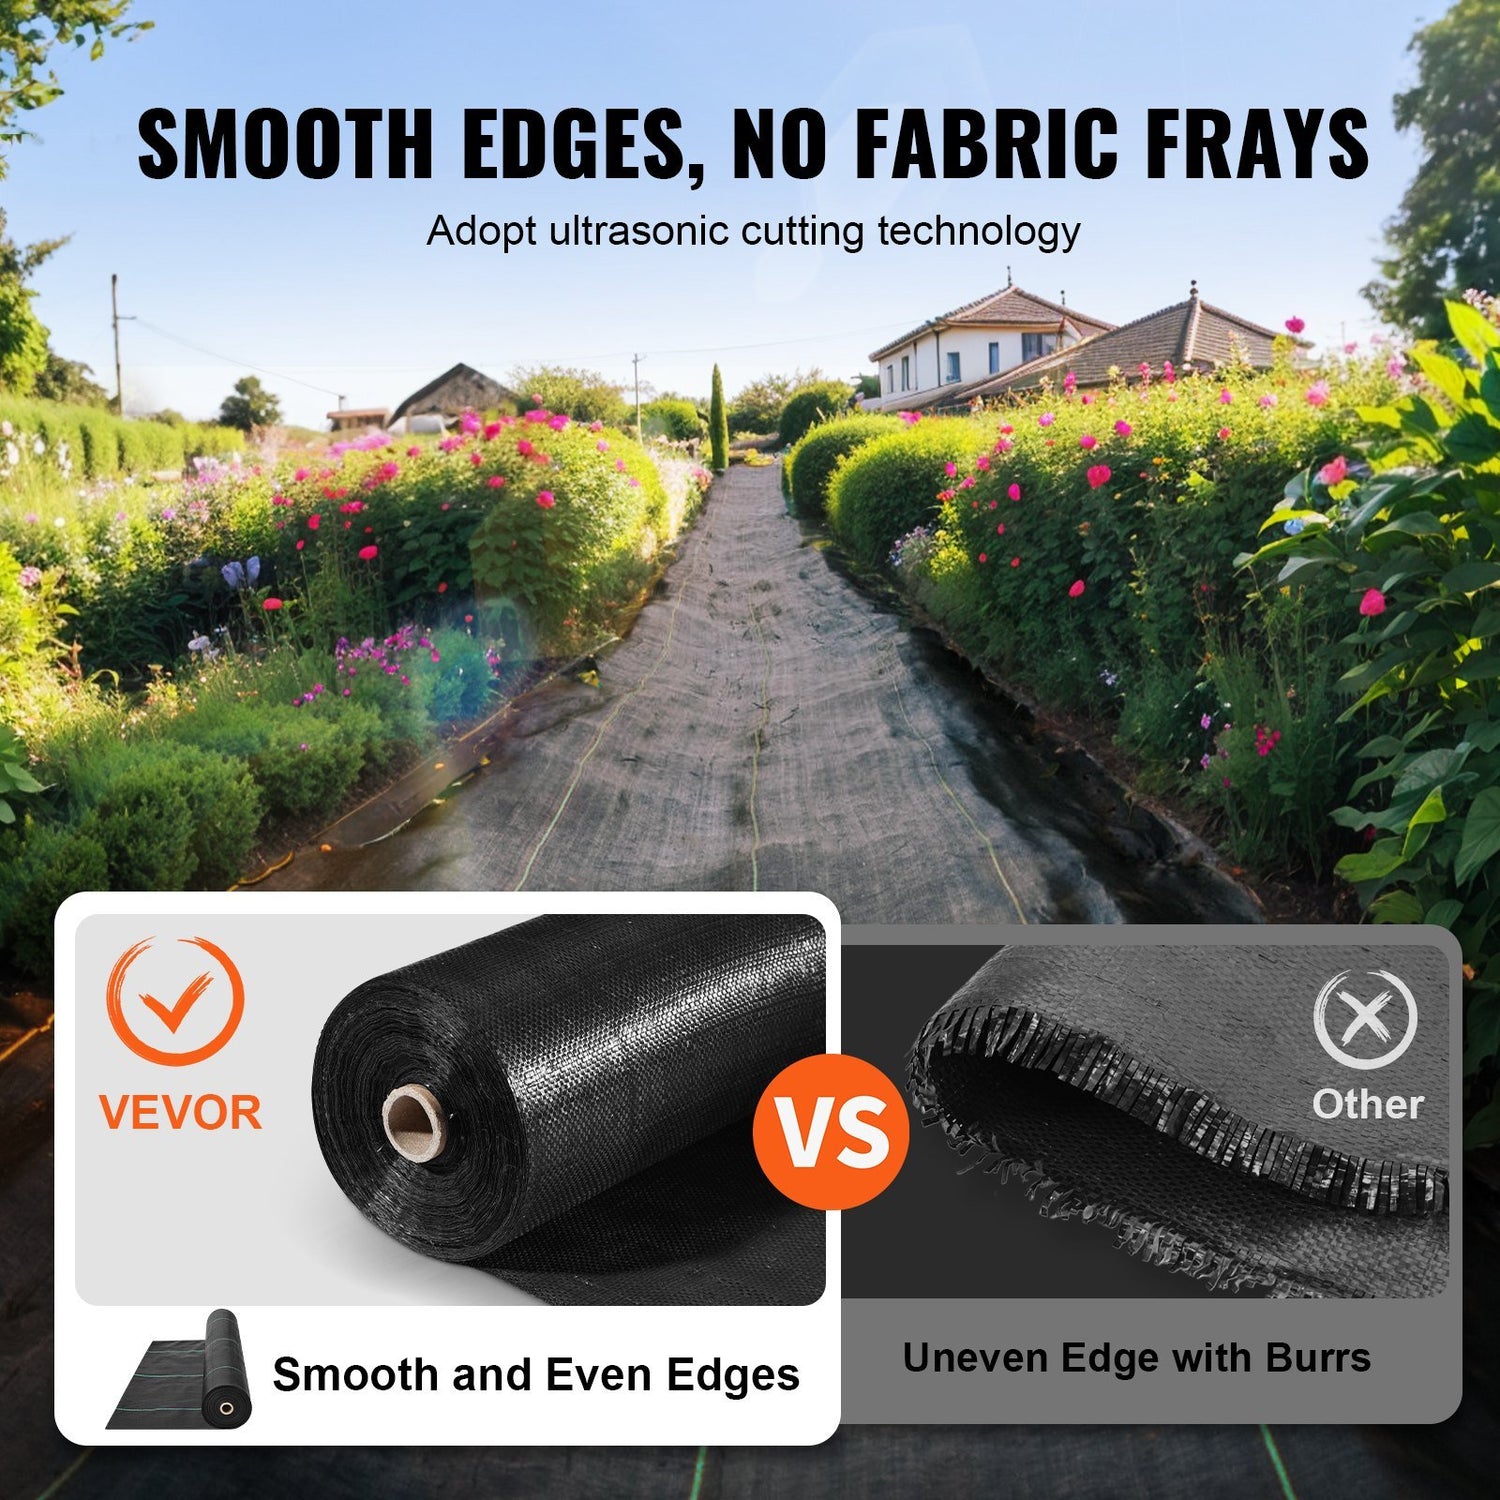 VEVOR Weed Barrier Landscape Fabric, Heavy Duty Garden Weed Fabric, Woven PP Weed Control Fabric, Driveway Fabric, Geotextile Fabric - Ethereal Company